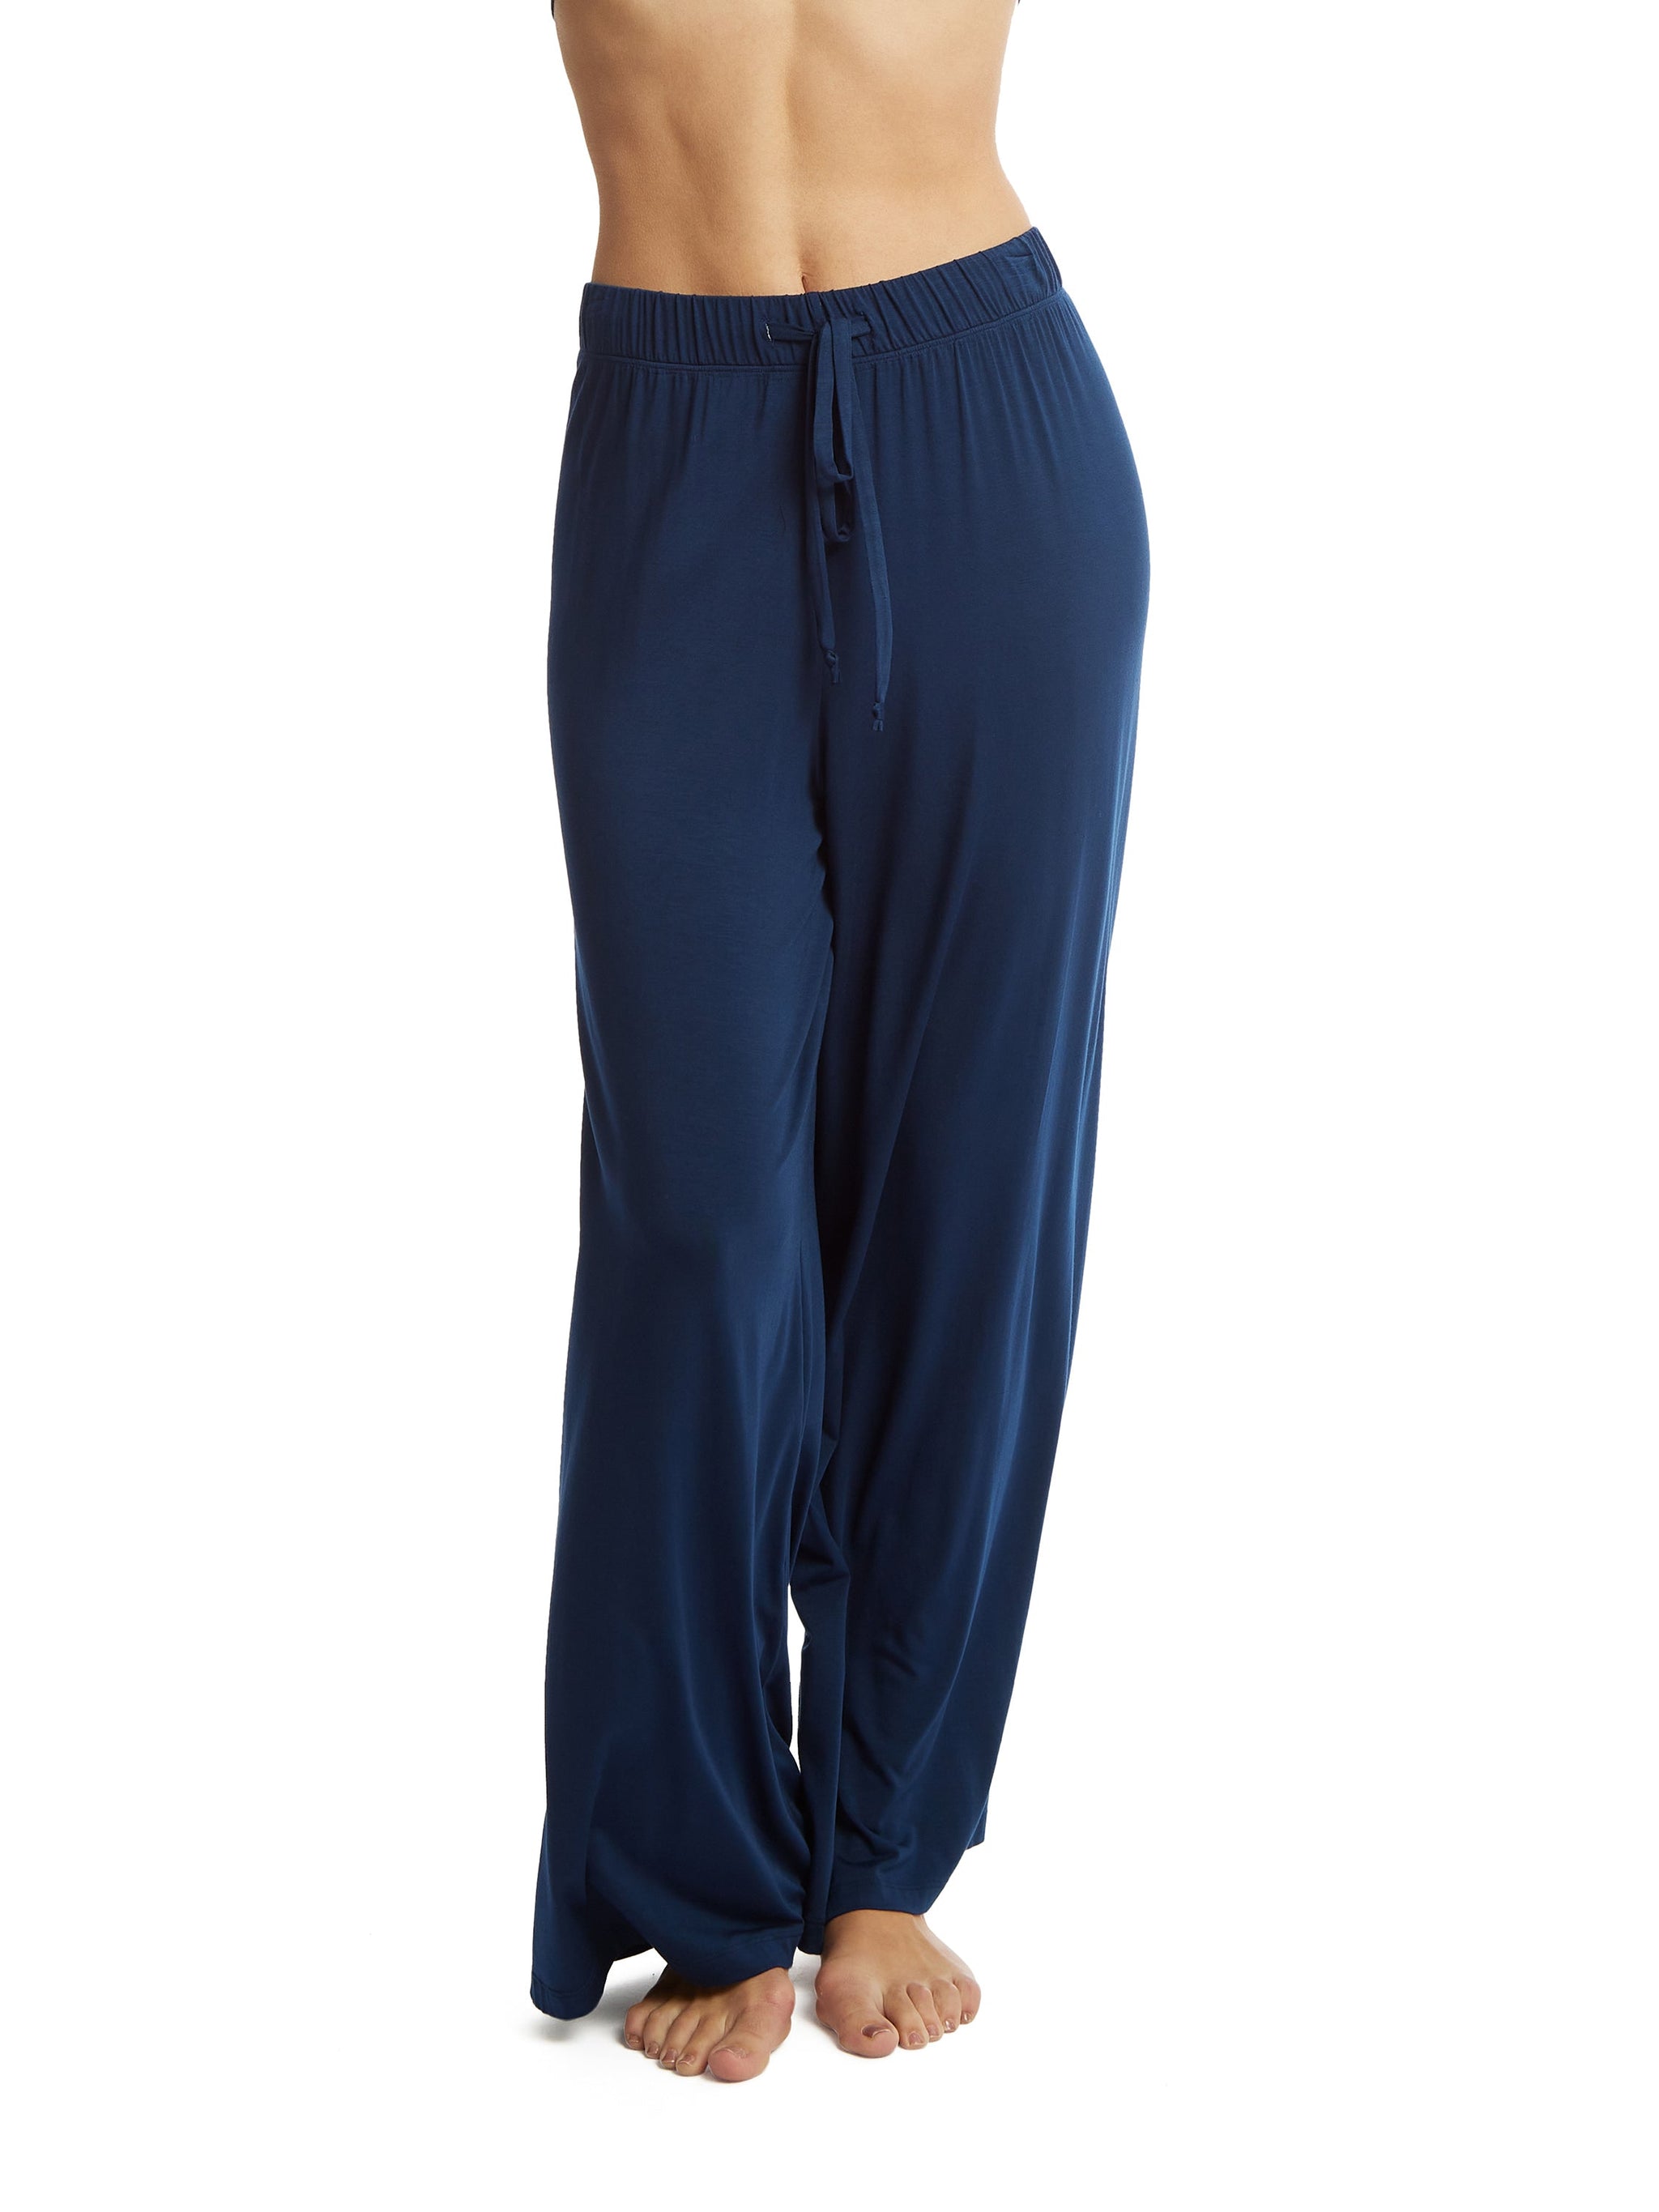 Buy Women's Micro Modal Cotton Relaxed Fit Printed Pyjama with Lace Trim on  Pockets - Infinity Blue RX09